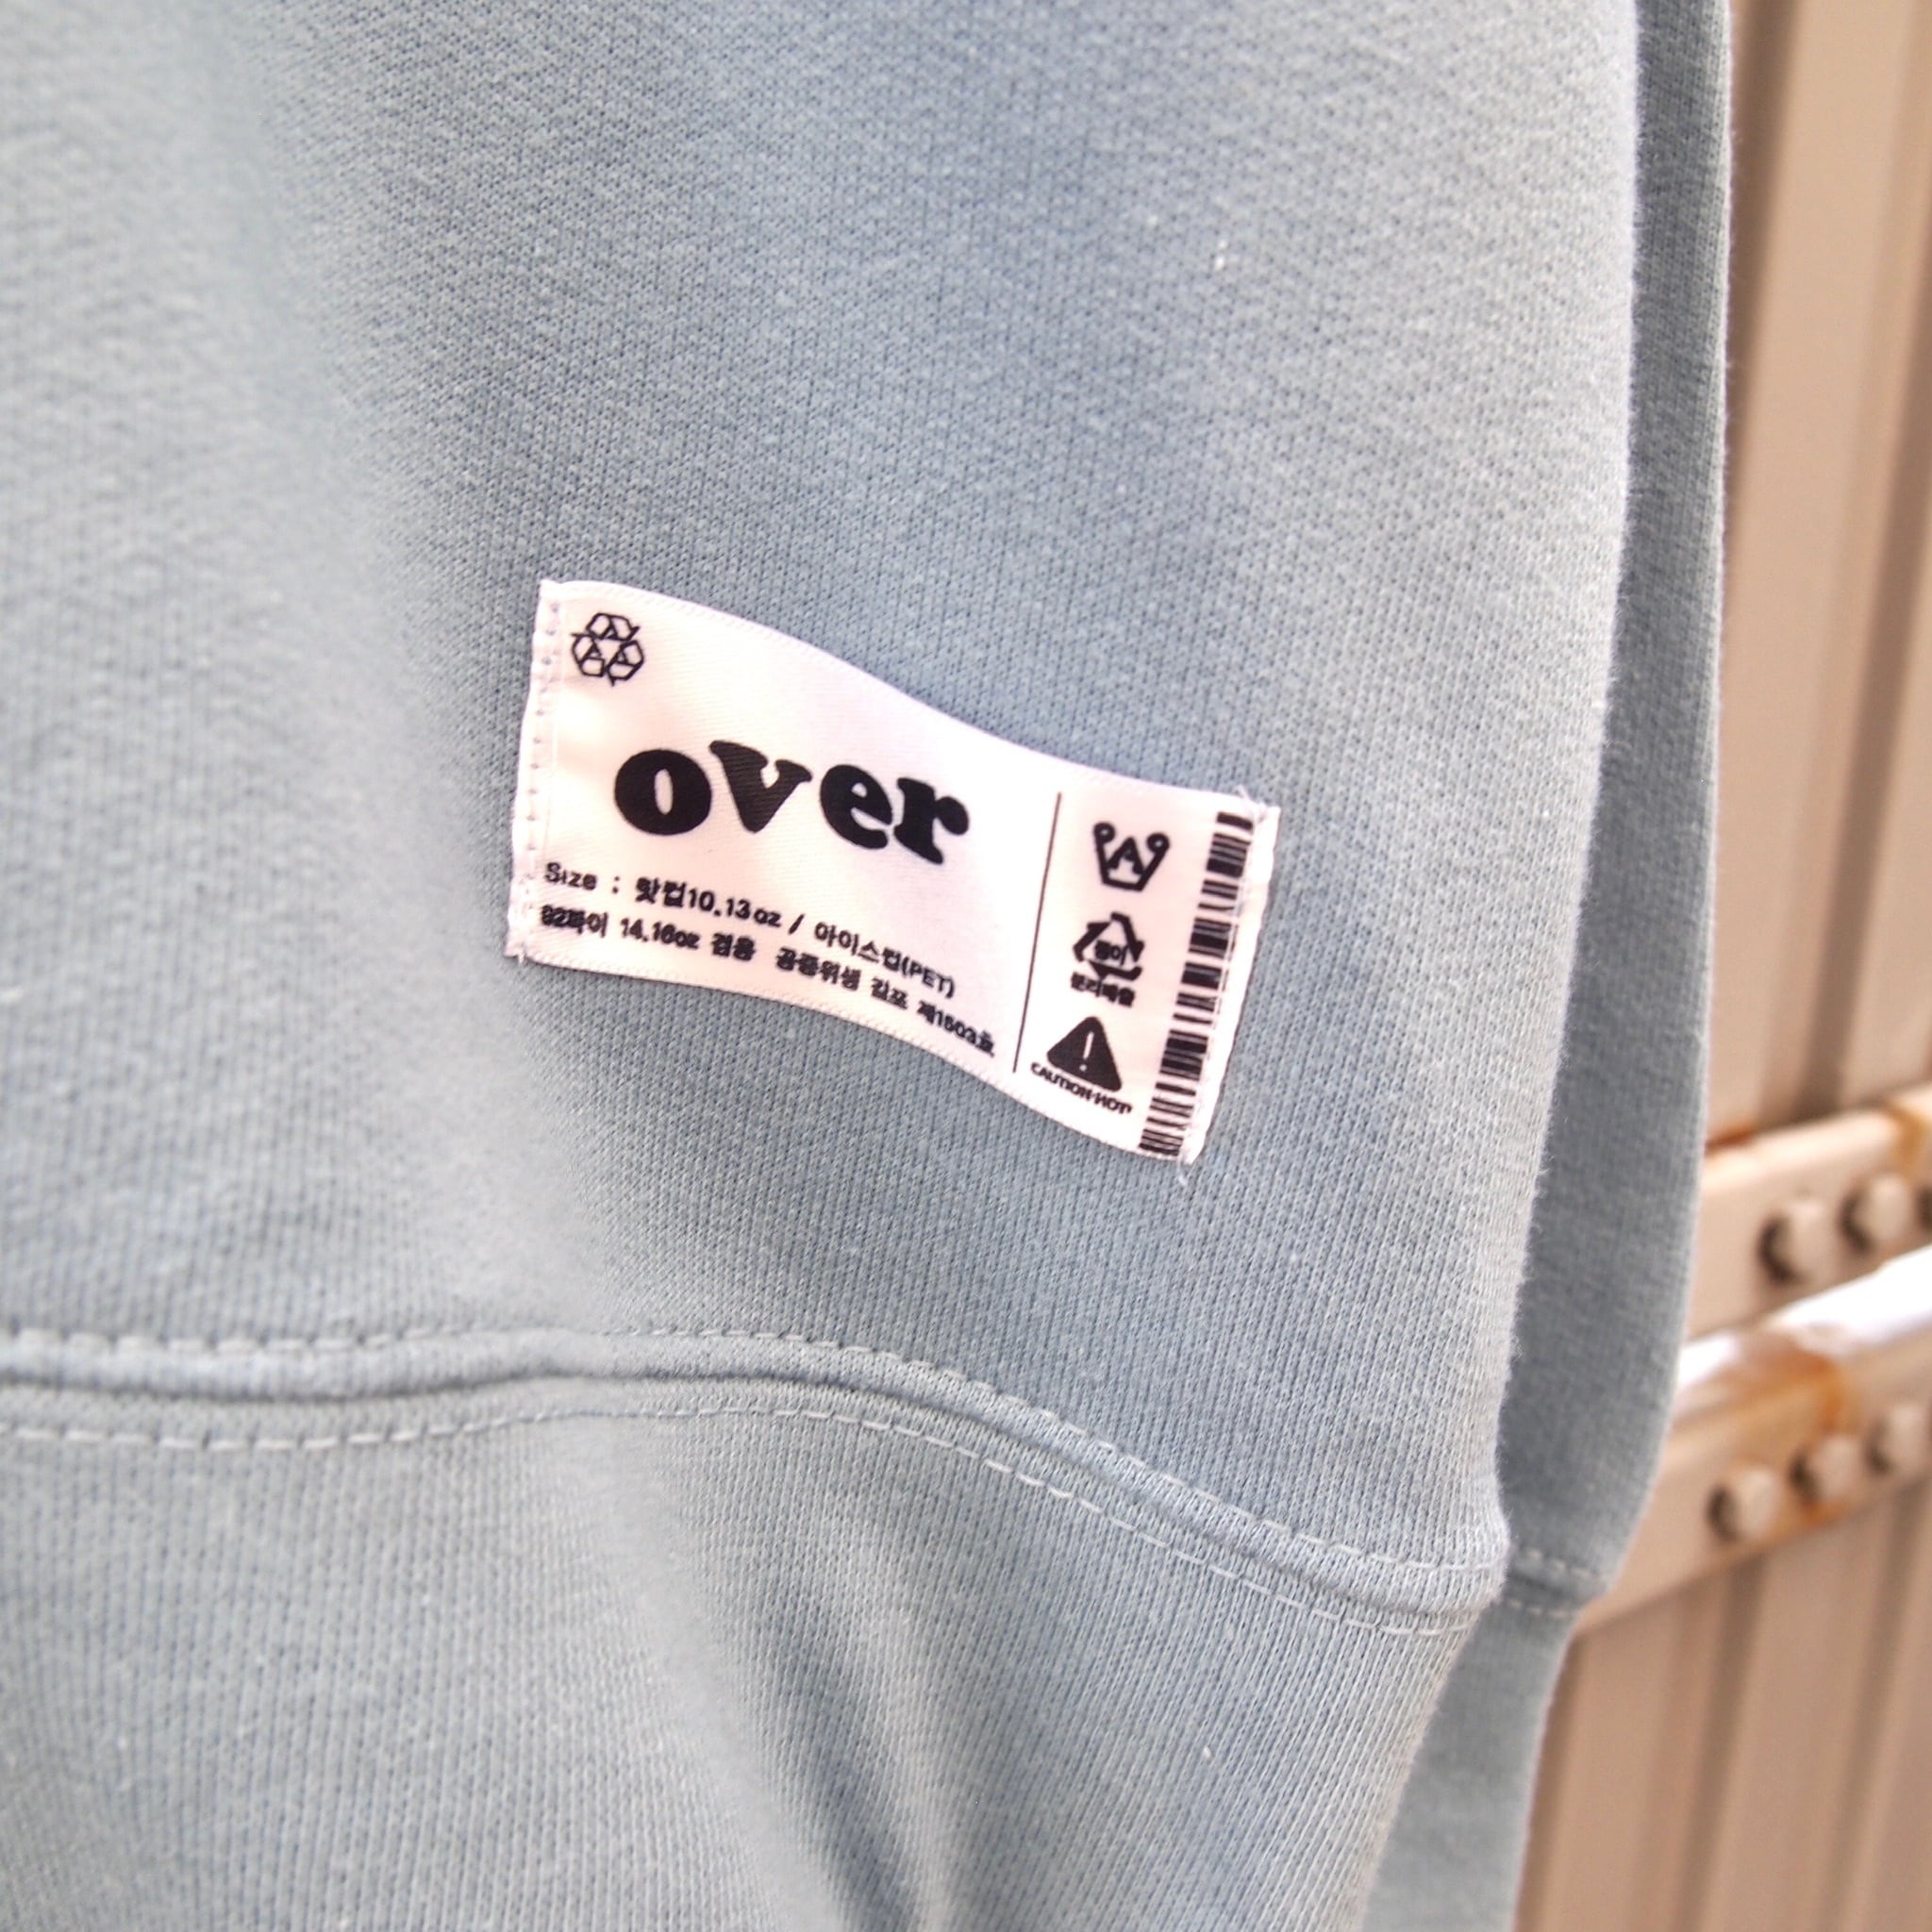 OVER PRINT BOT CREWNECK PULLOVERトップス